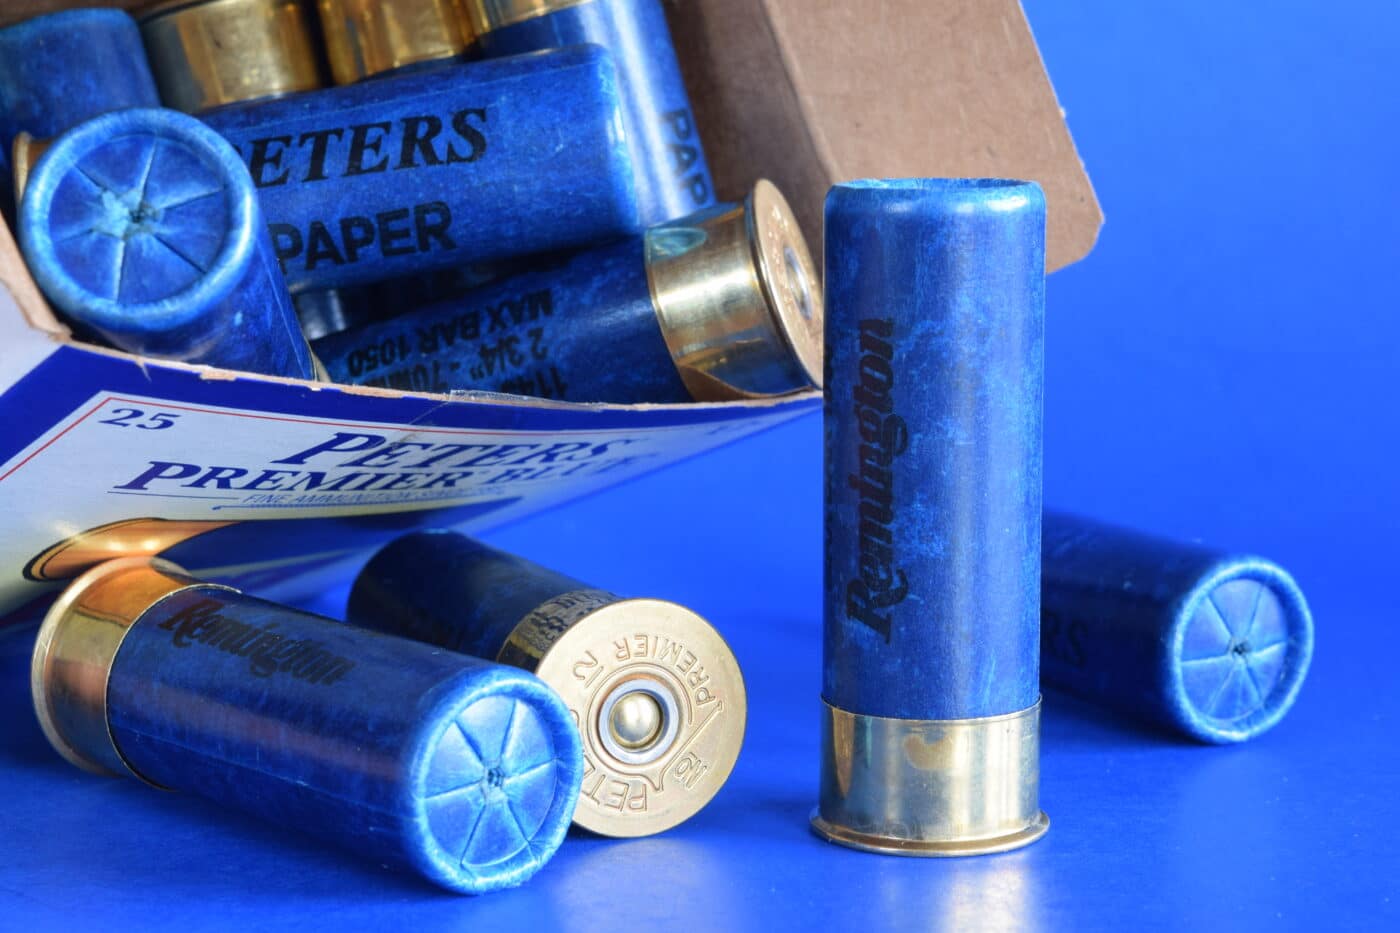 Brass heads of the new Peters shotshells